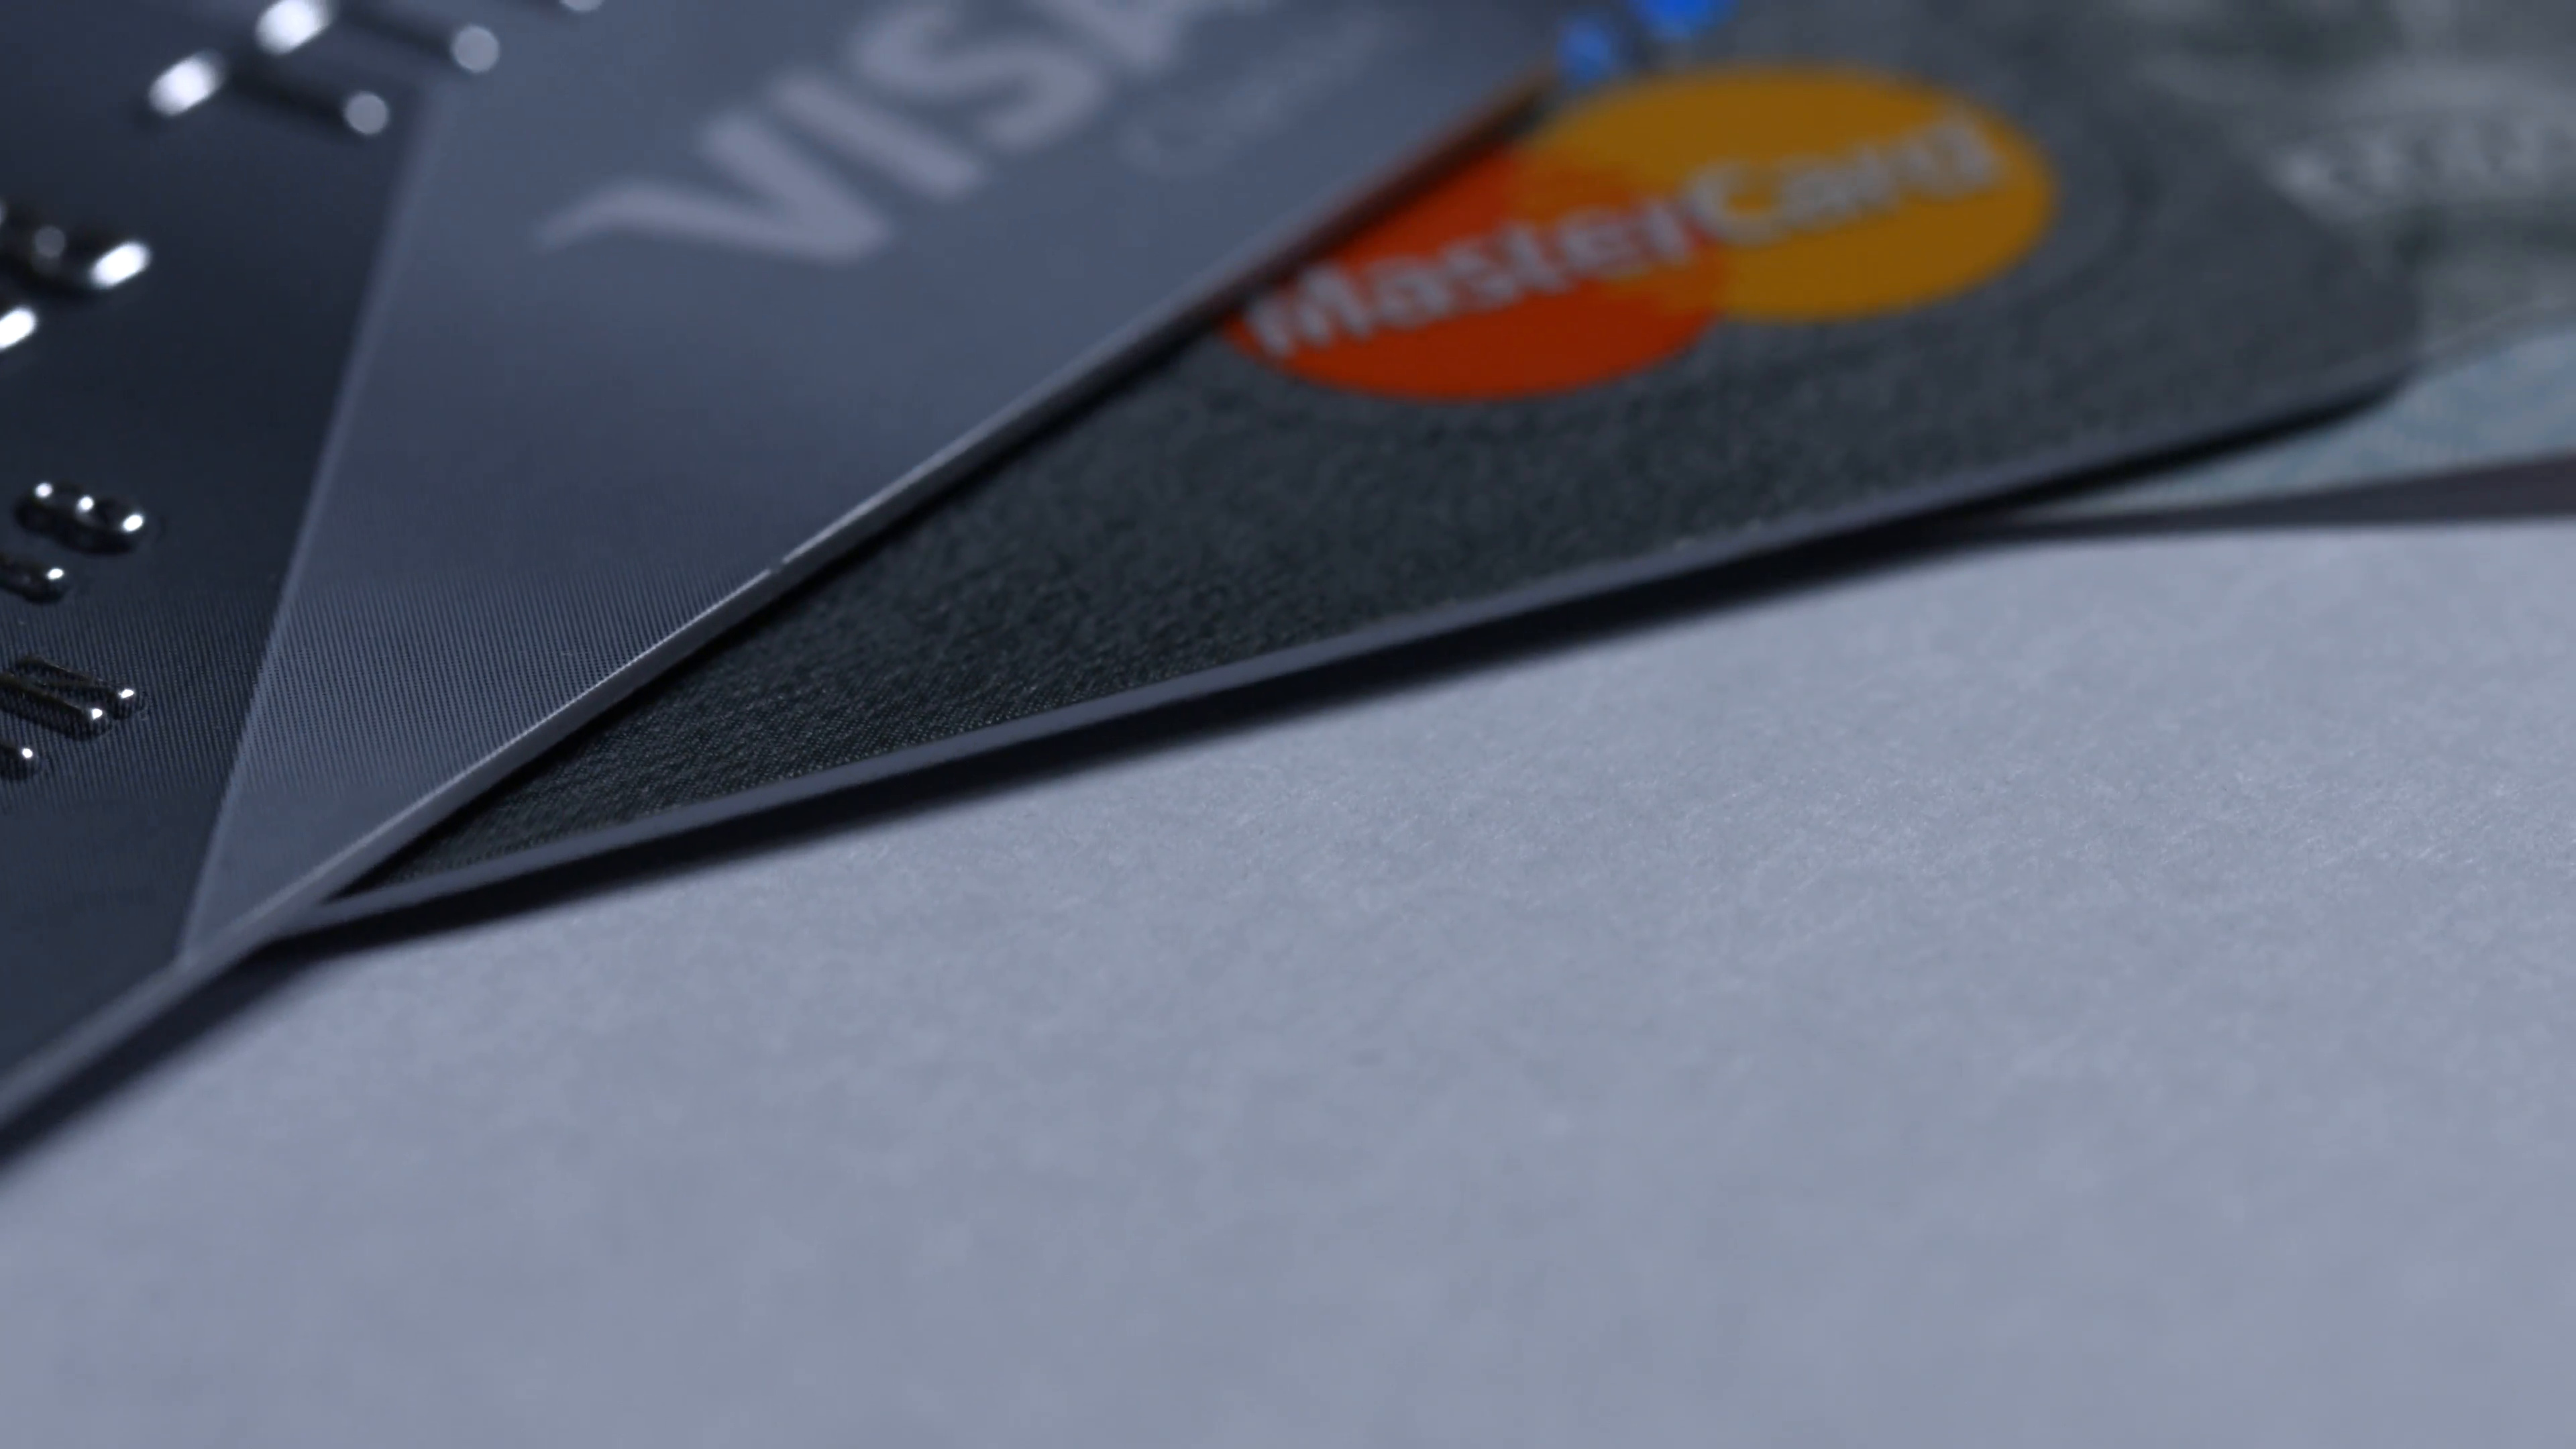 Mastercard: Plastic cards, The first bank to use holograms as part of their card security, MasterCard International Inc. 3840x2160 4K Wallpaper.